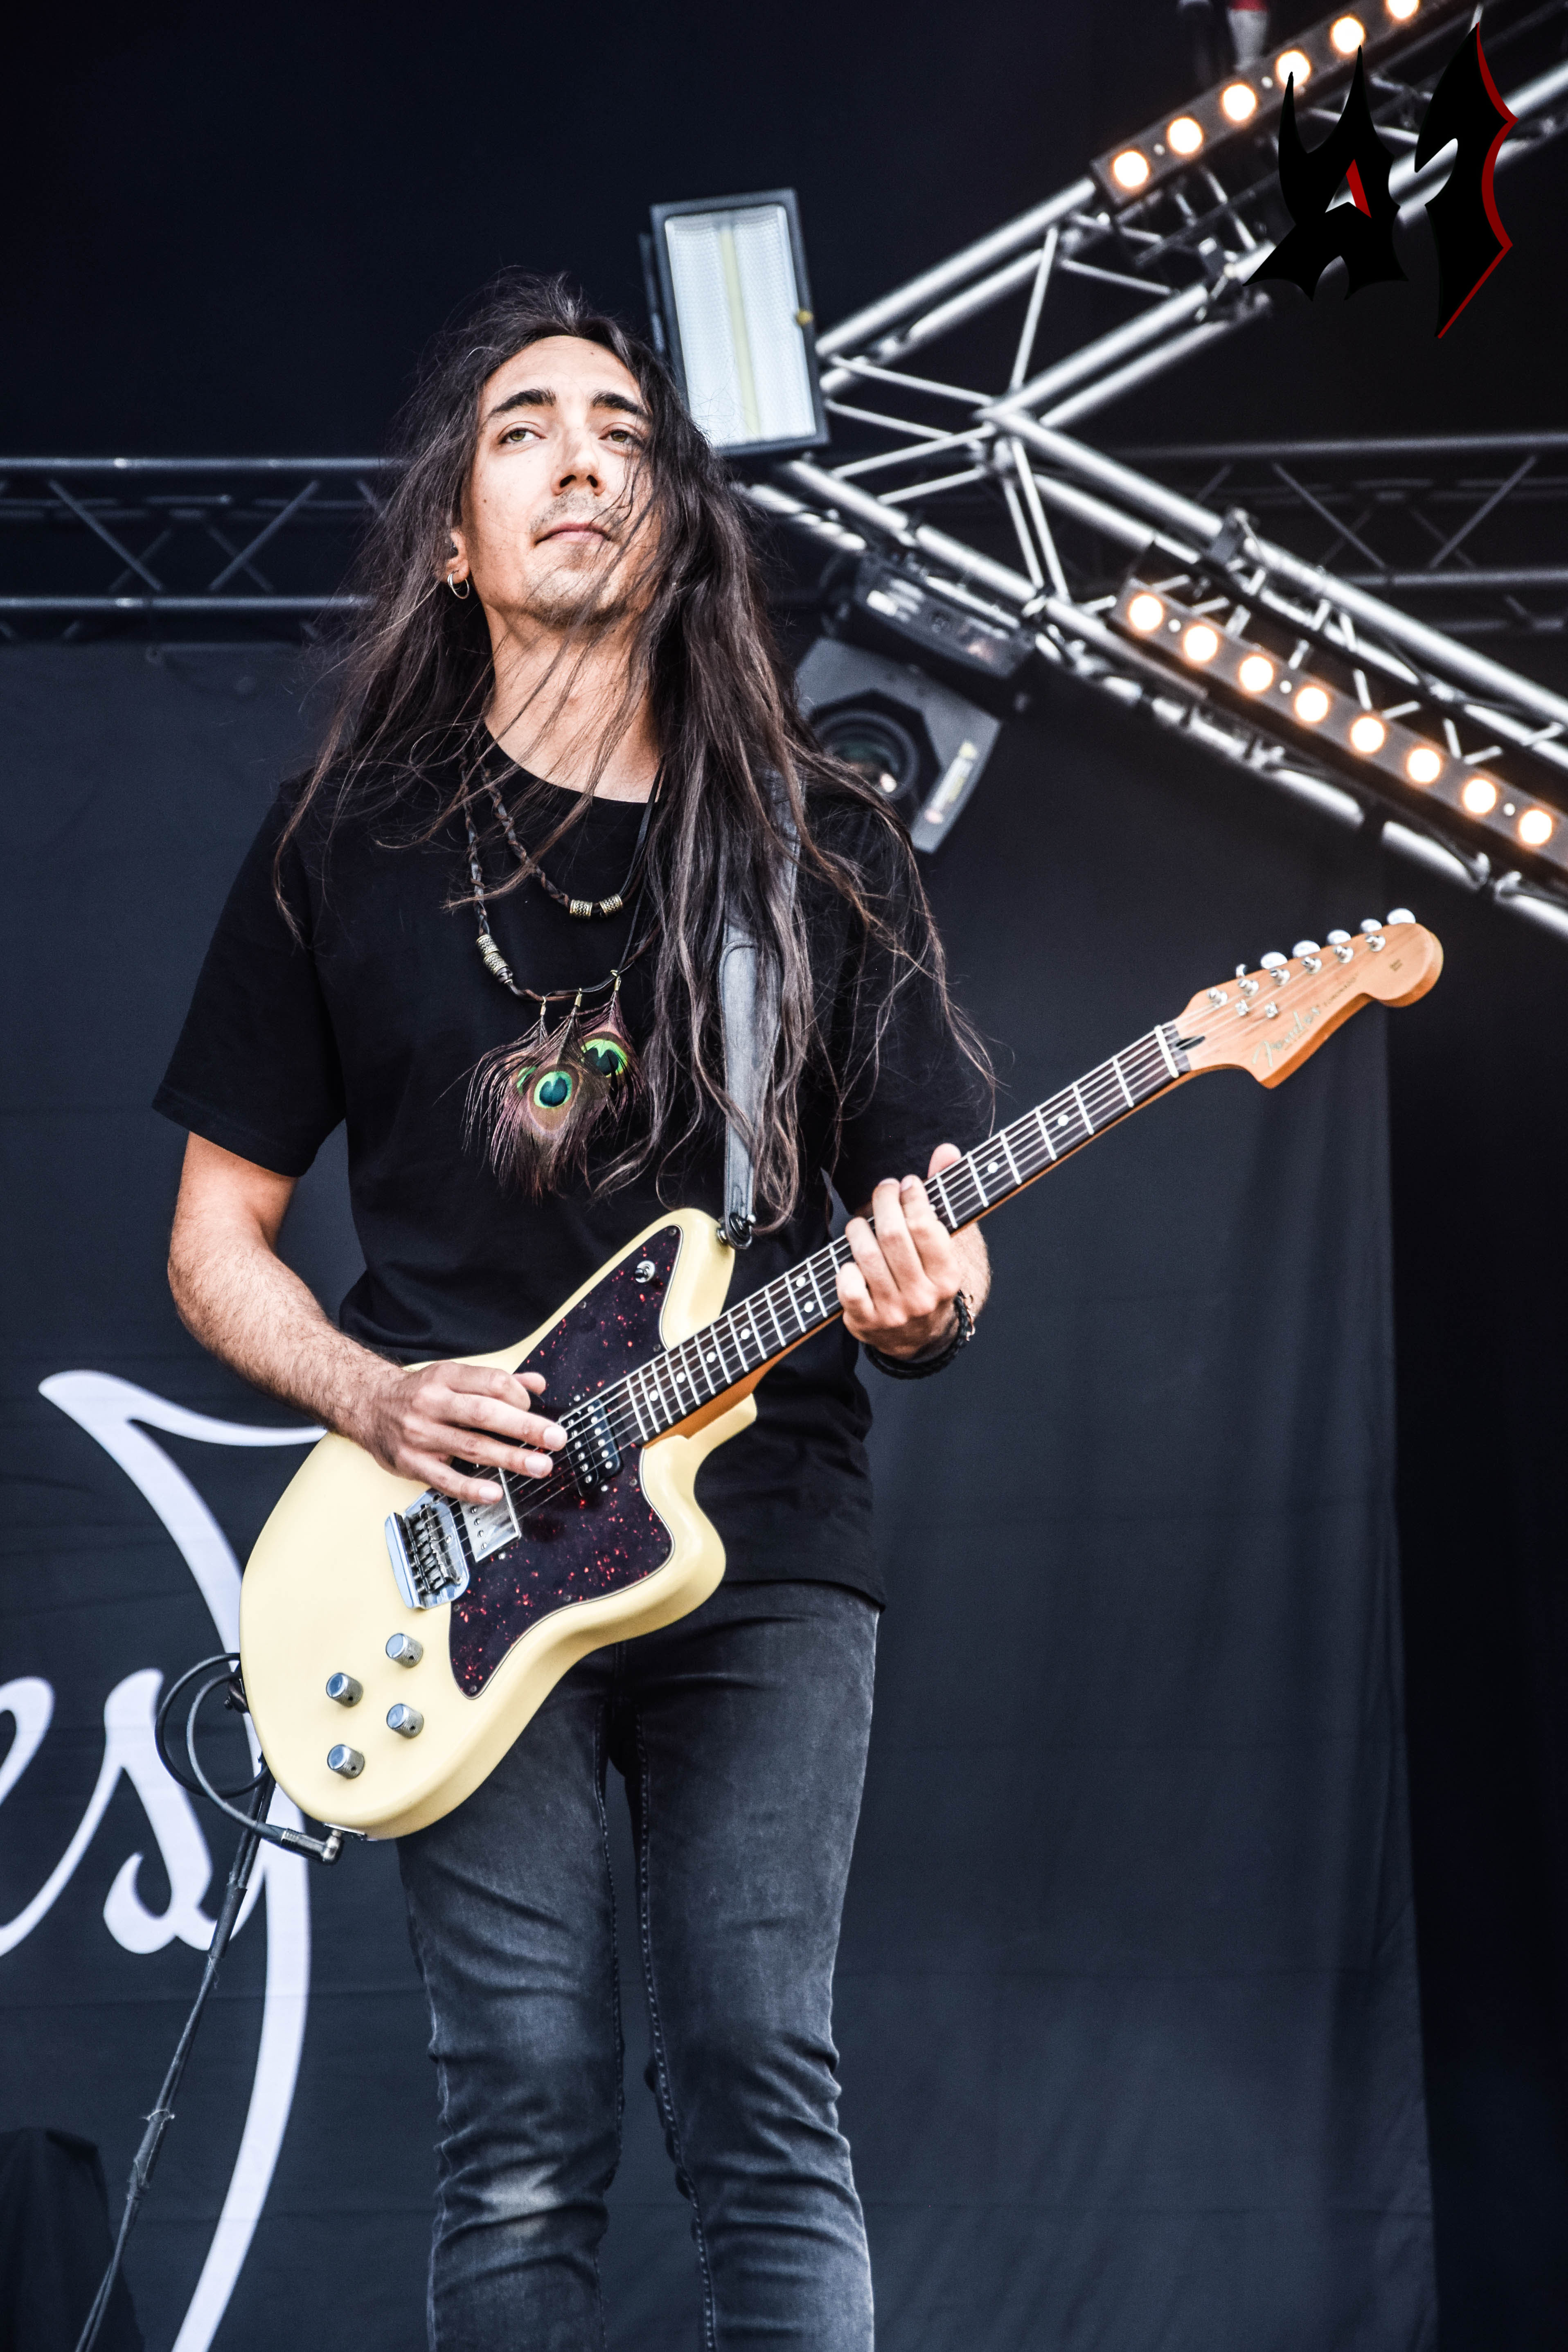 Donwload 2018 – Day 2 - Alcest 5